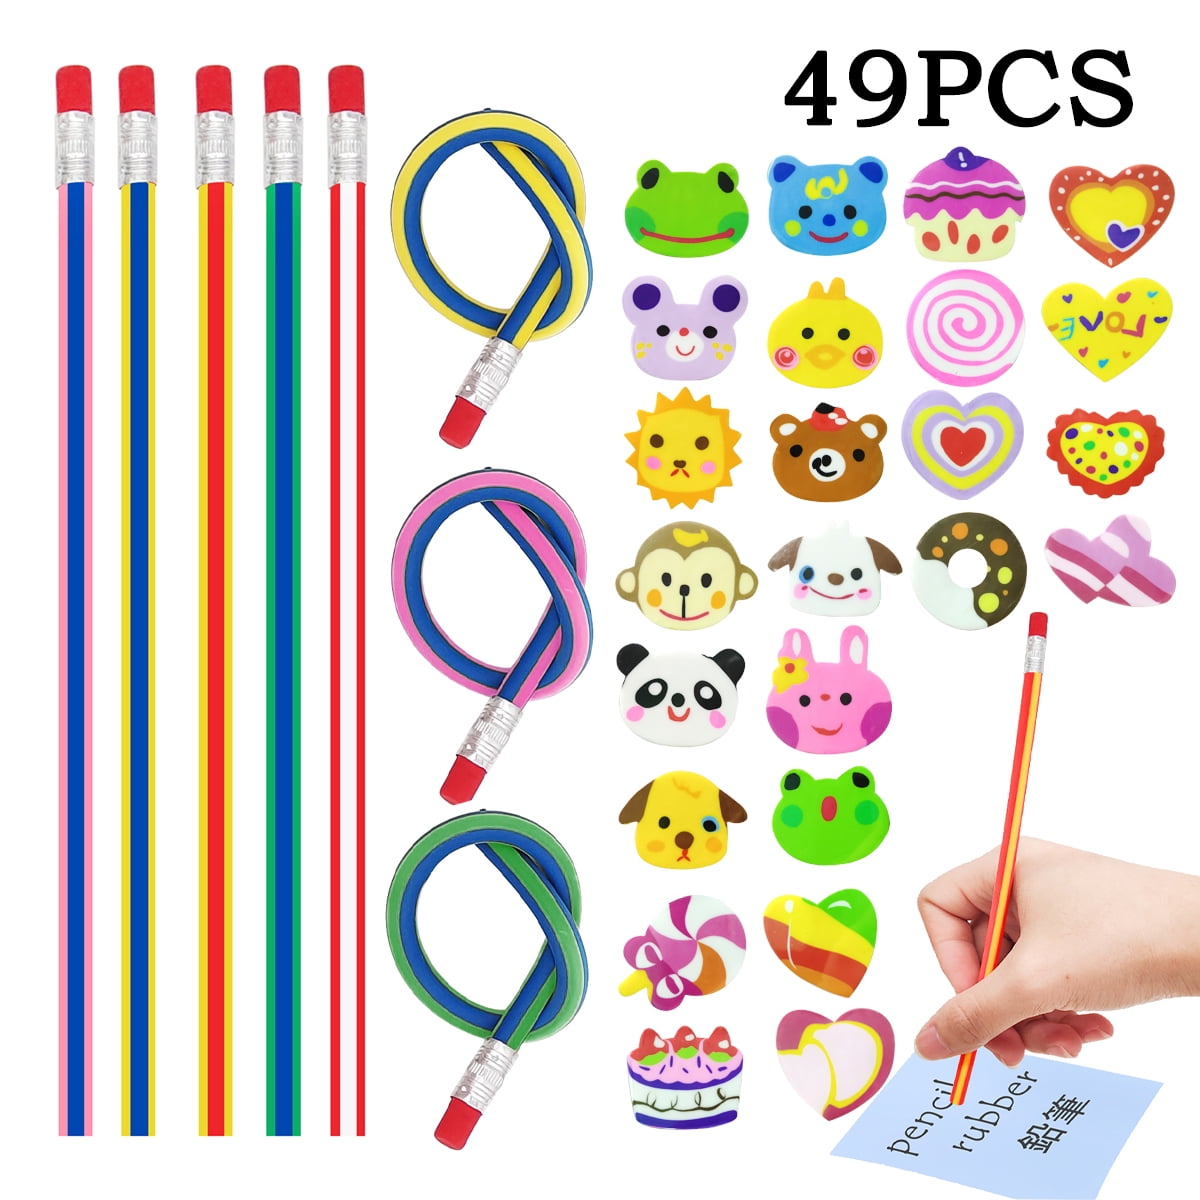 Retrok 6pcs Everlasting Pencil Eternal Pencil Reusable Infinity Pencil with  6 Replacement Nibs Portable Writing Drawing Pencils Set Cute Unlimited  Pencils for School Students Office 